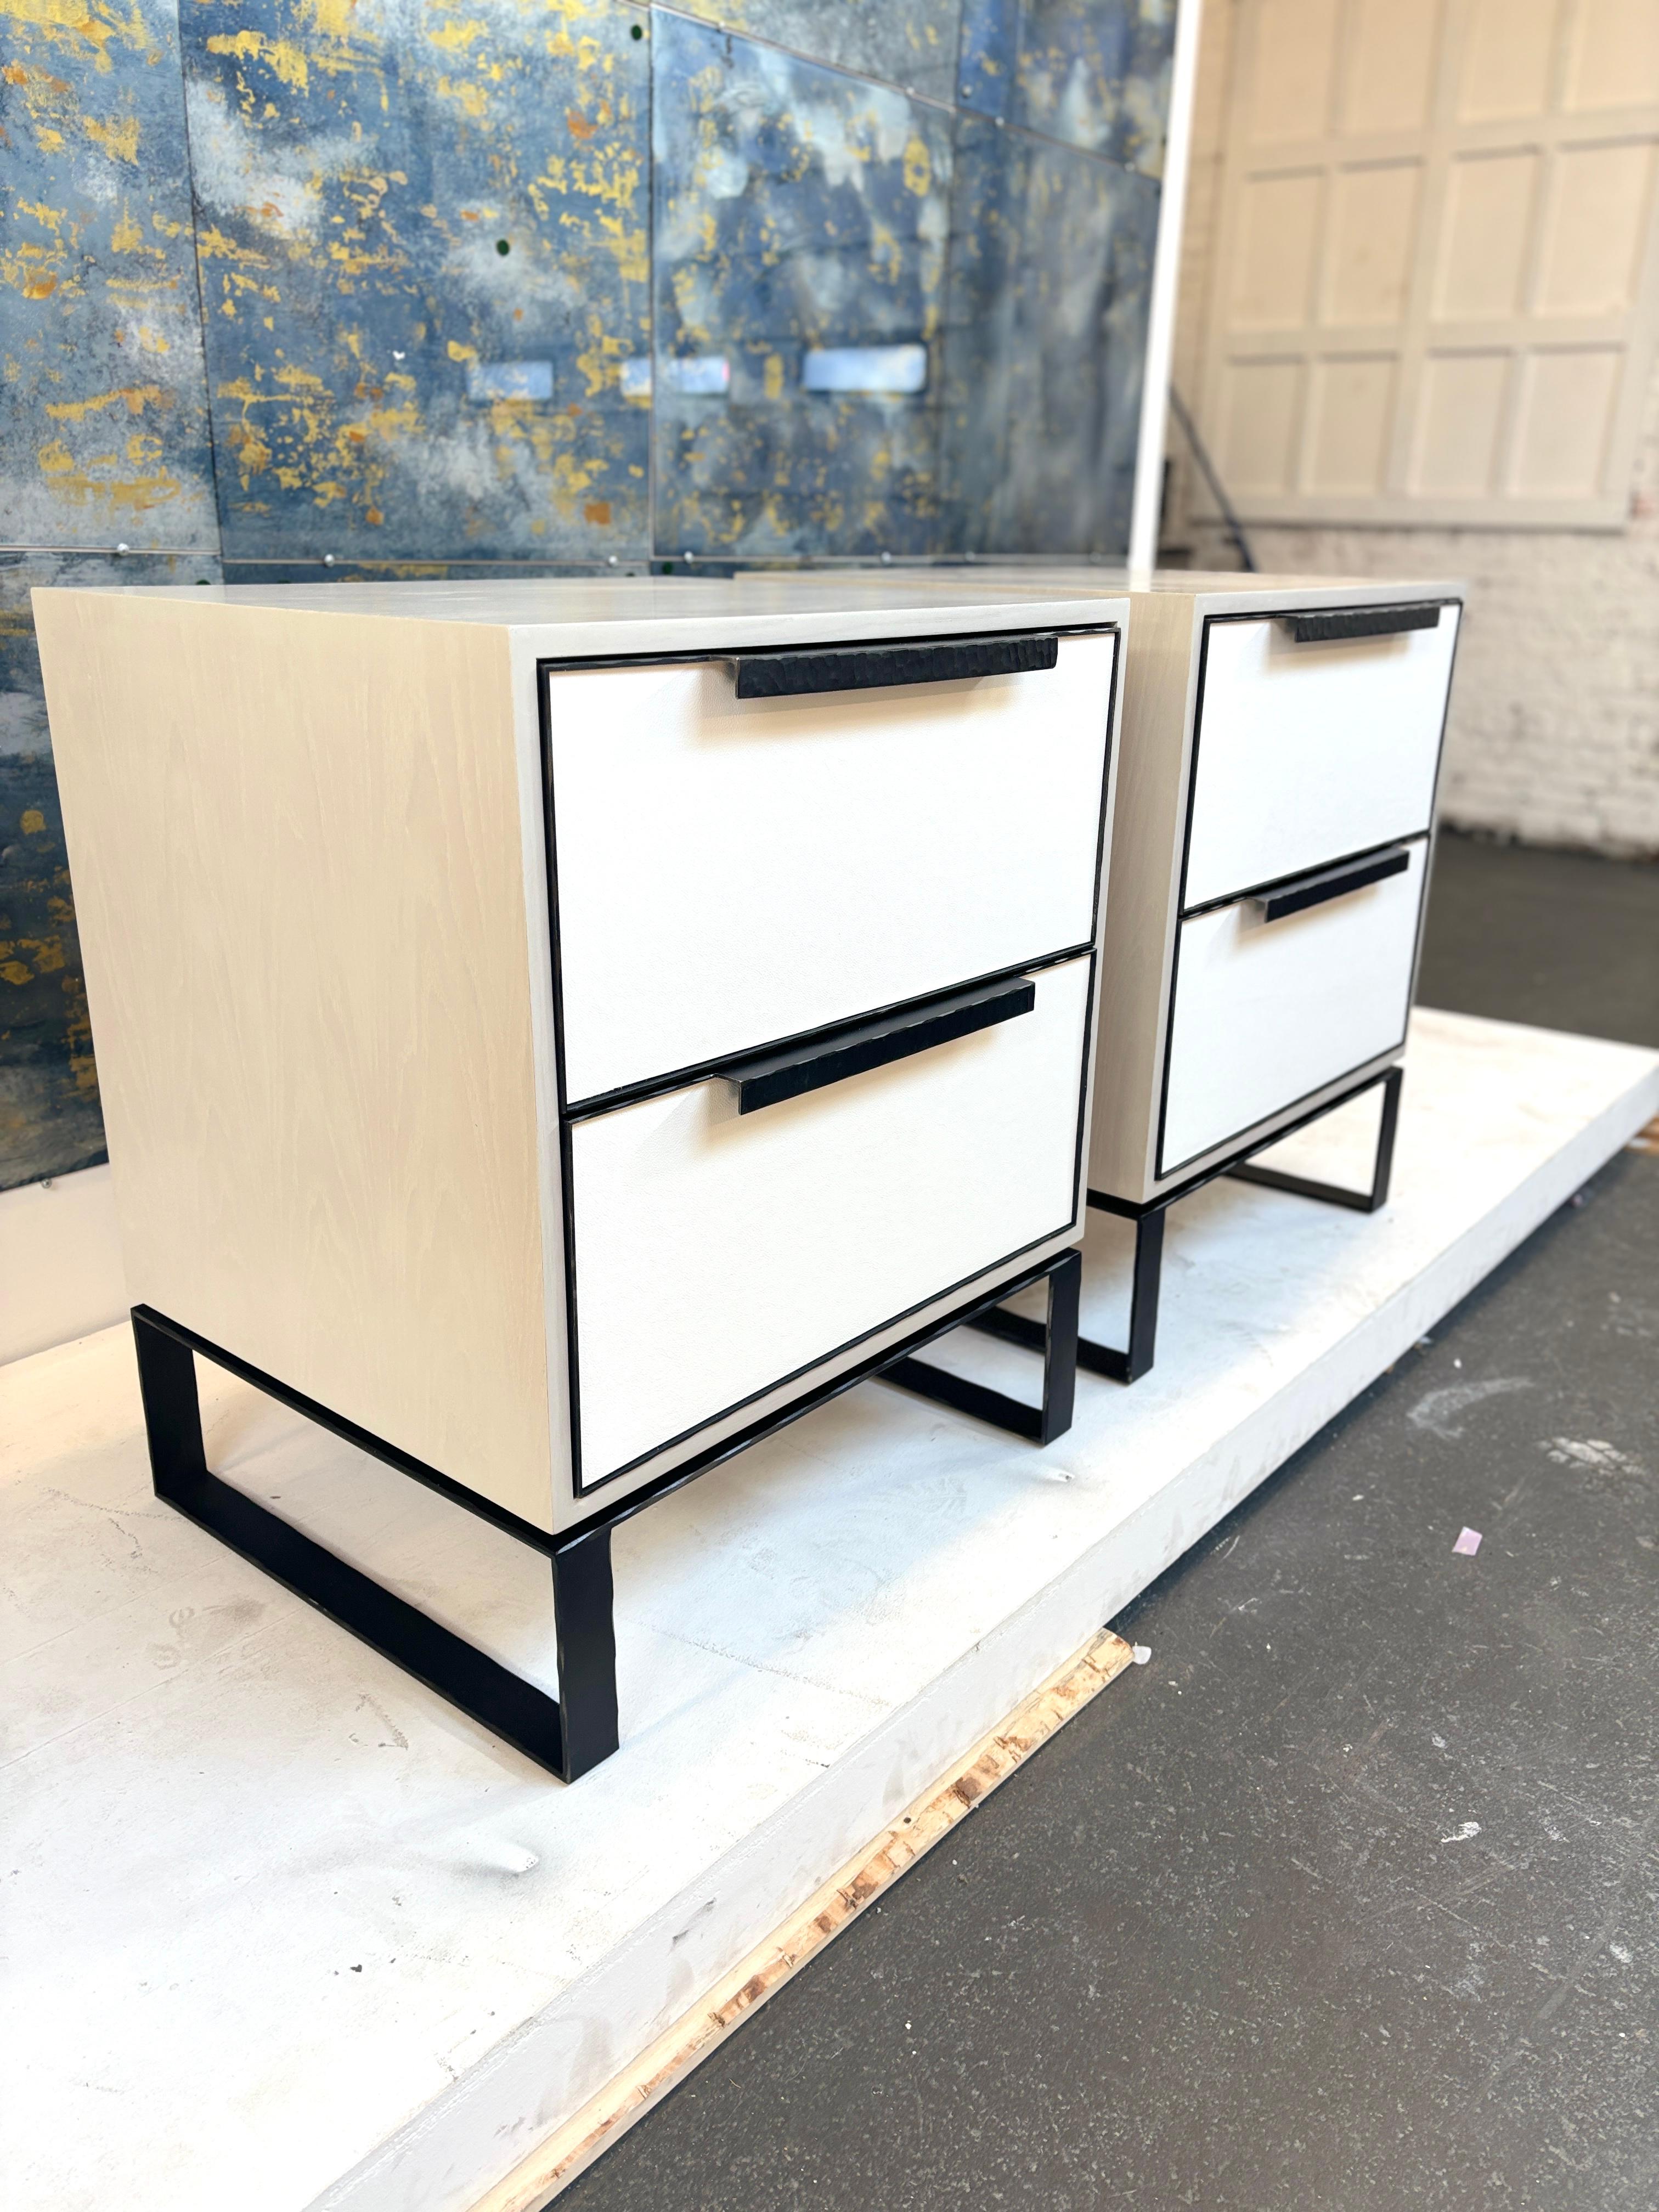 The Modern Chelsea 2-drawer leather nightstand is made up of two leather drawers covered in white leather. The Nightstand is coated in a washed Ivory Oak wood finish which pairs perfectly with the natural steel hand hammered frame and handle.